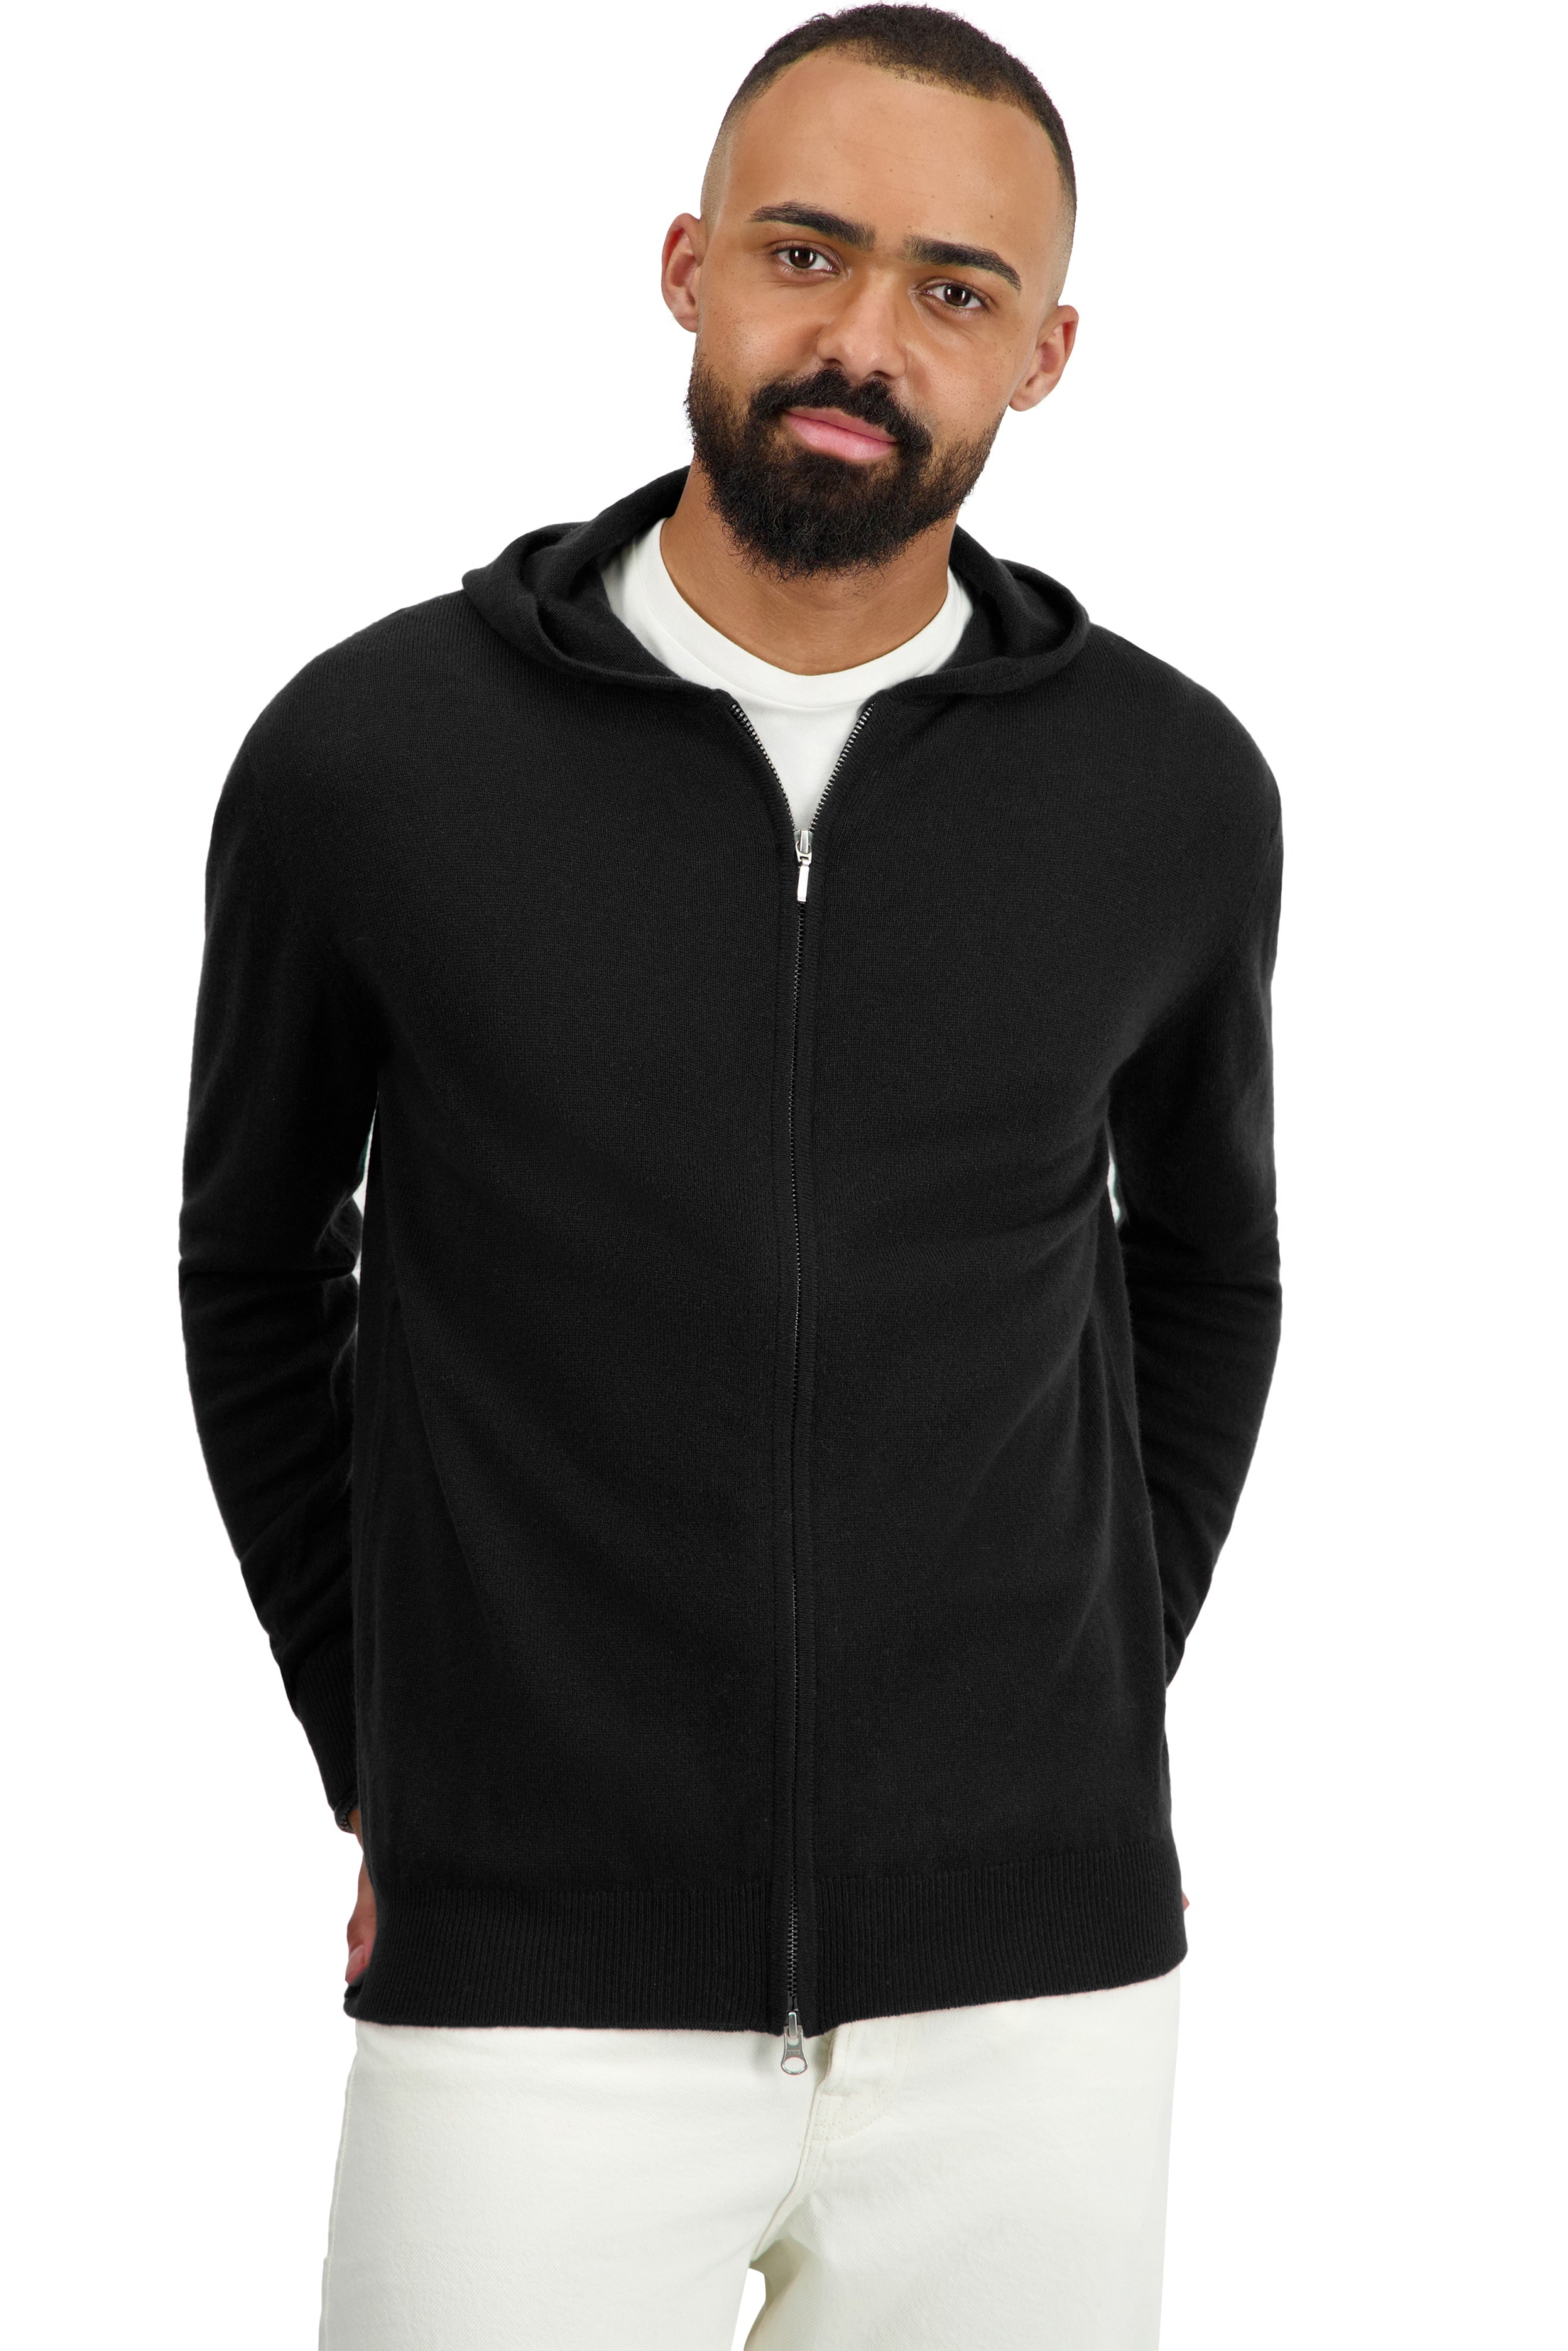 Cashmere men basic sweaters at low prices taboo first black 2xl